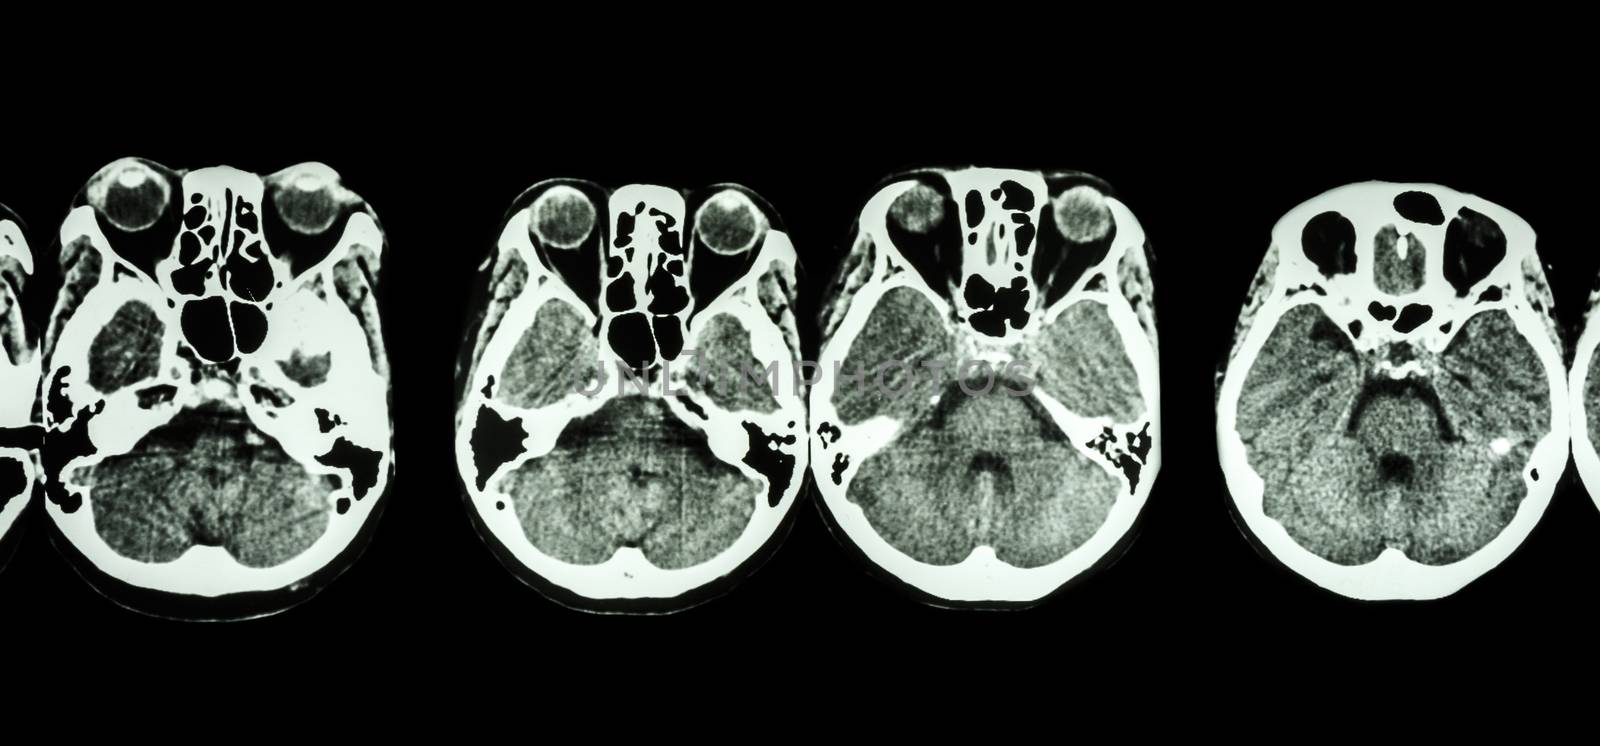 CT scan of brain and base of skull ( show structure of eye , ethmoid sinus , cerebellum , cerebrum, etc )